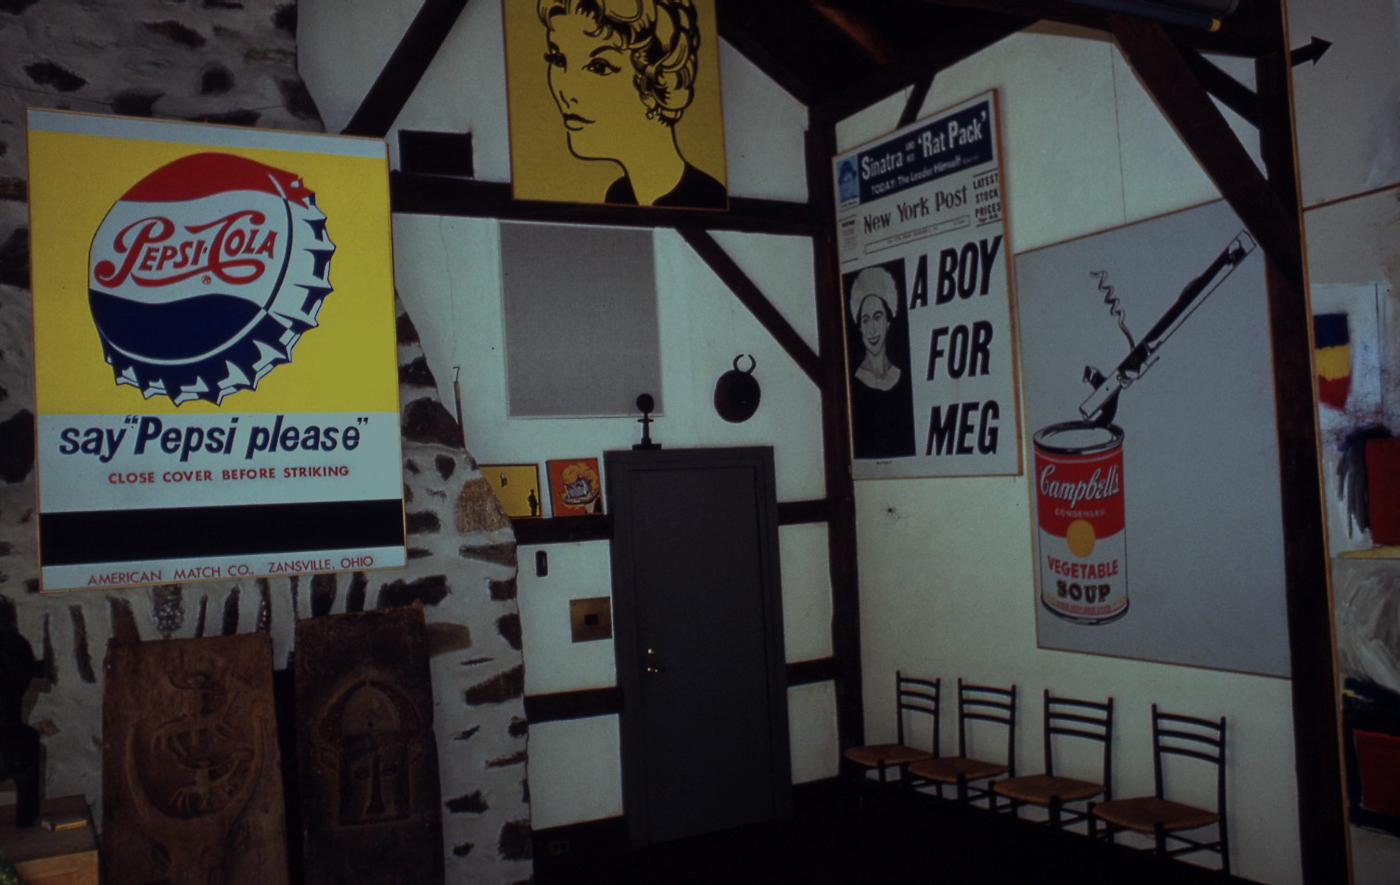 The Tremaine’s barn with works by Andy Warhol. Image courtesy of the Tremaine family.